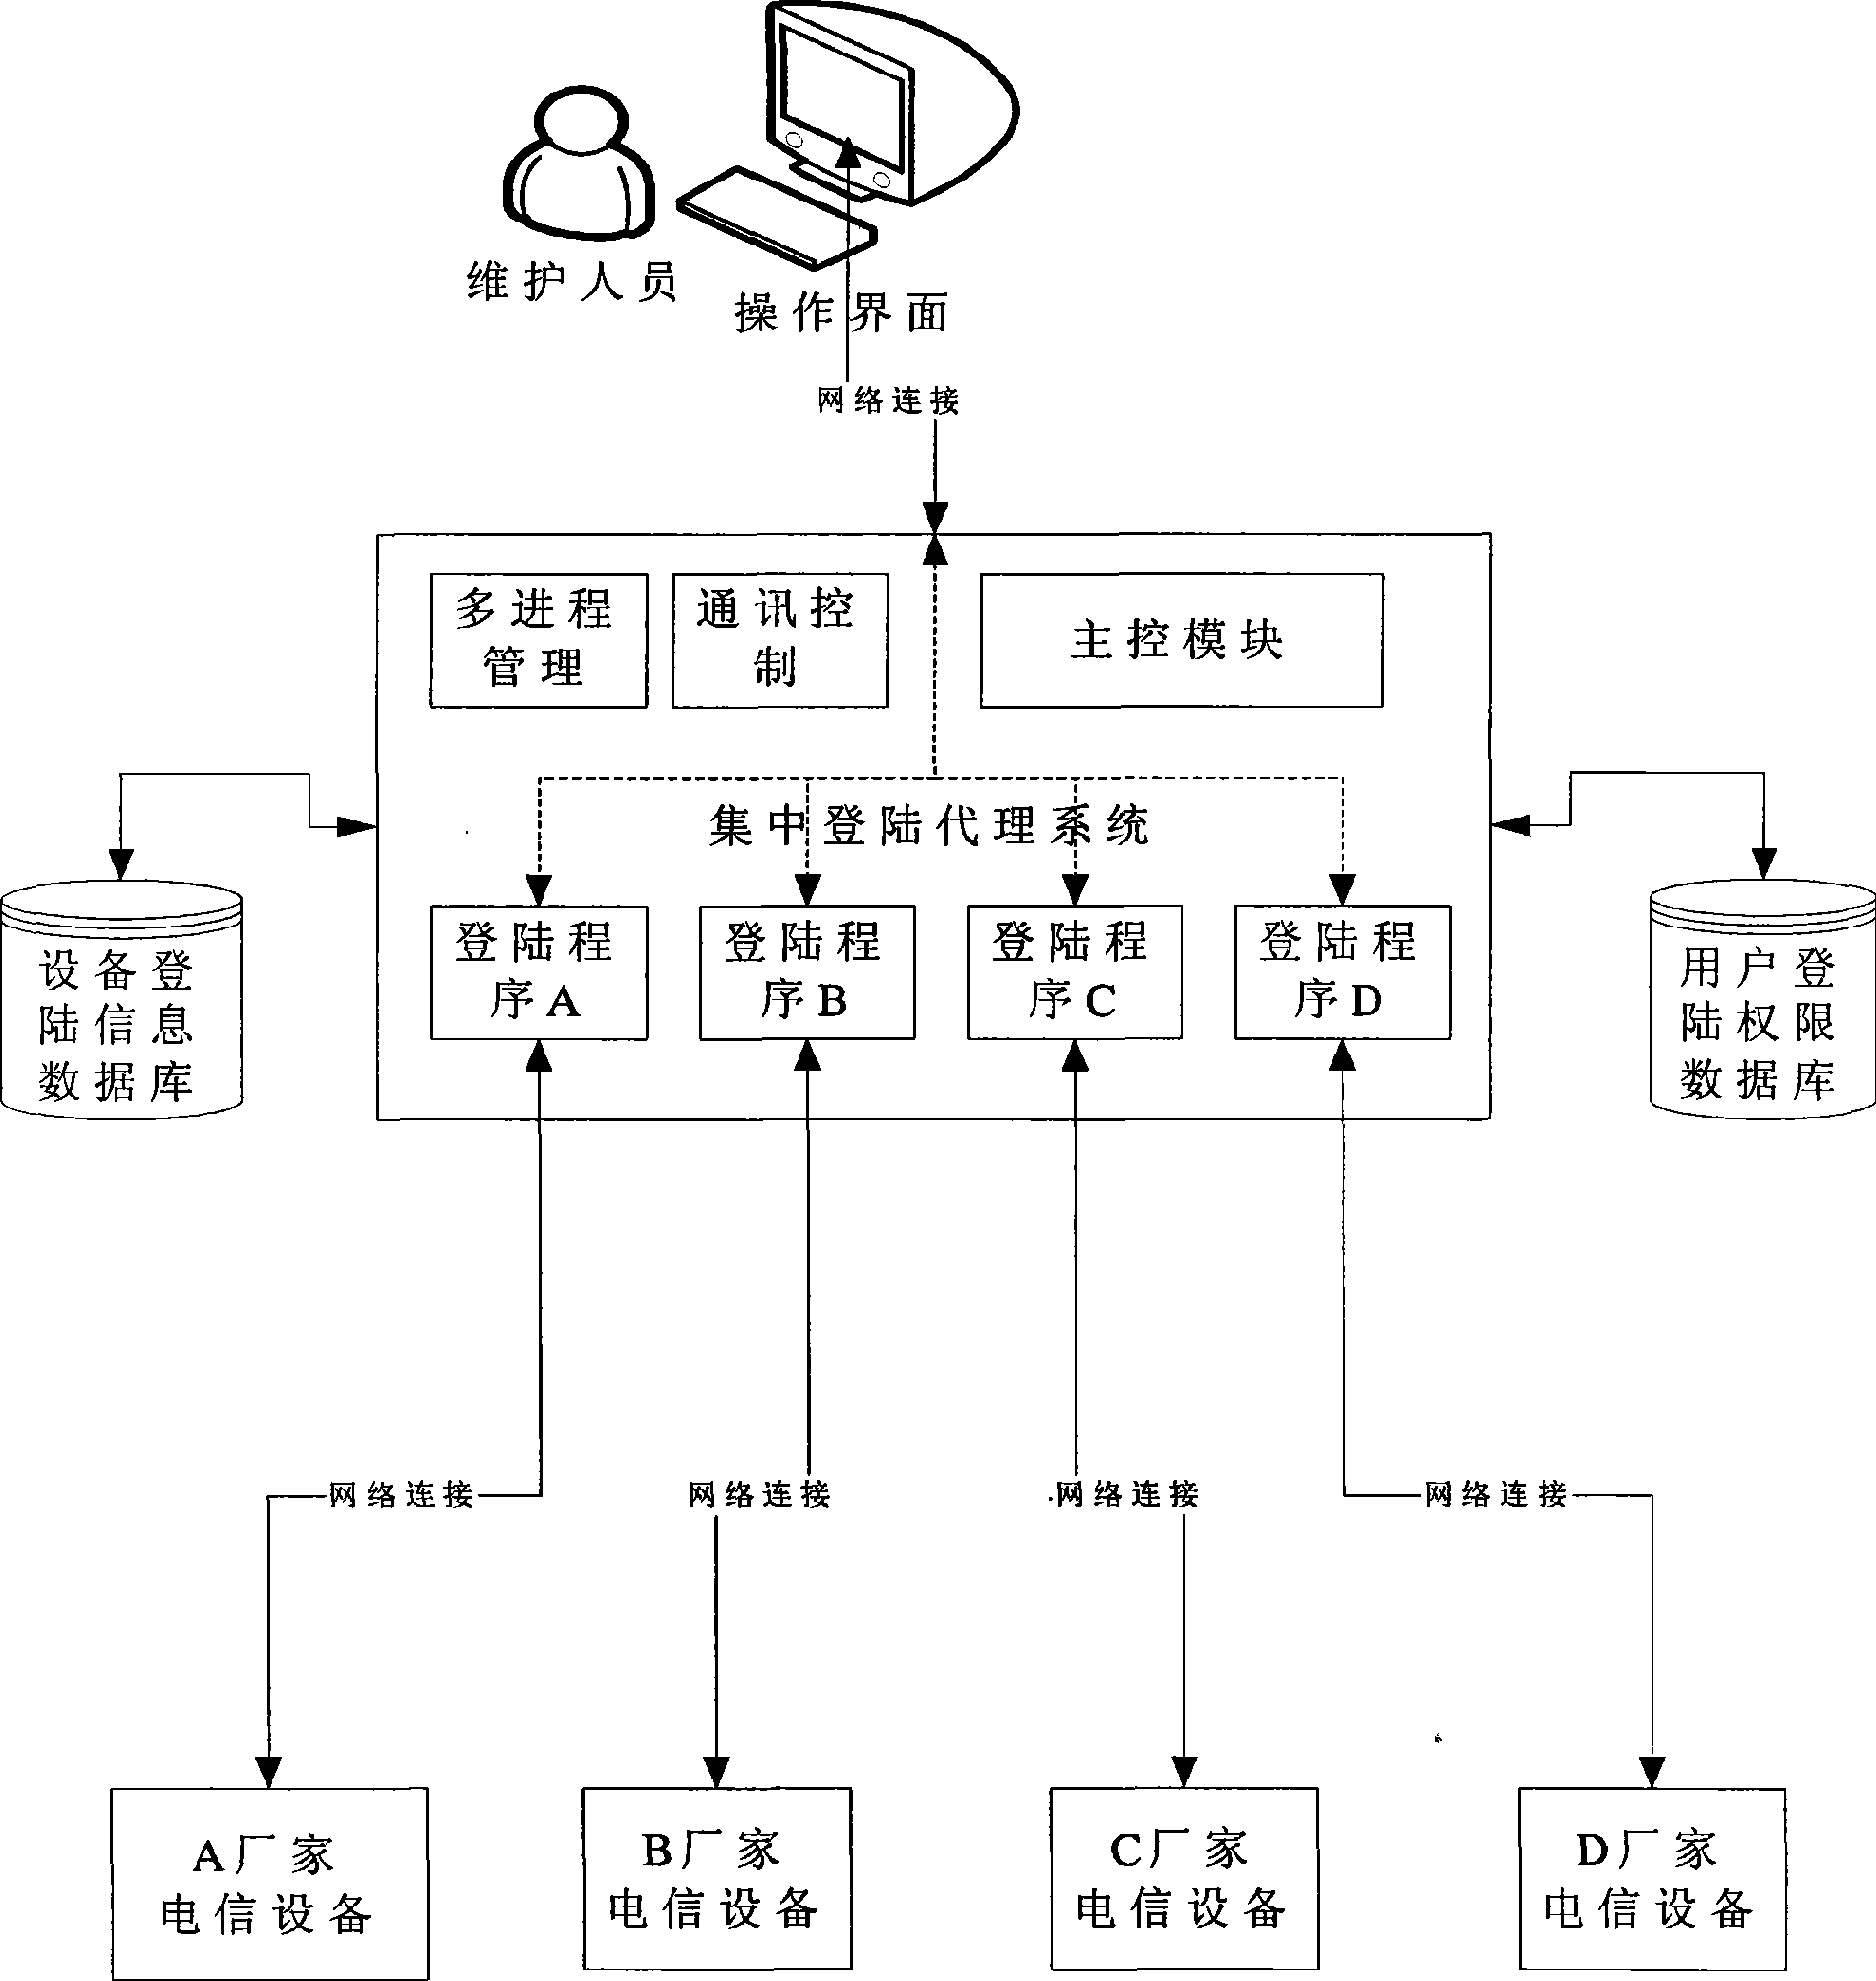 System for telecommunication equipment centralized login and implementing method thereof